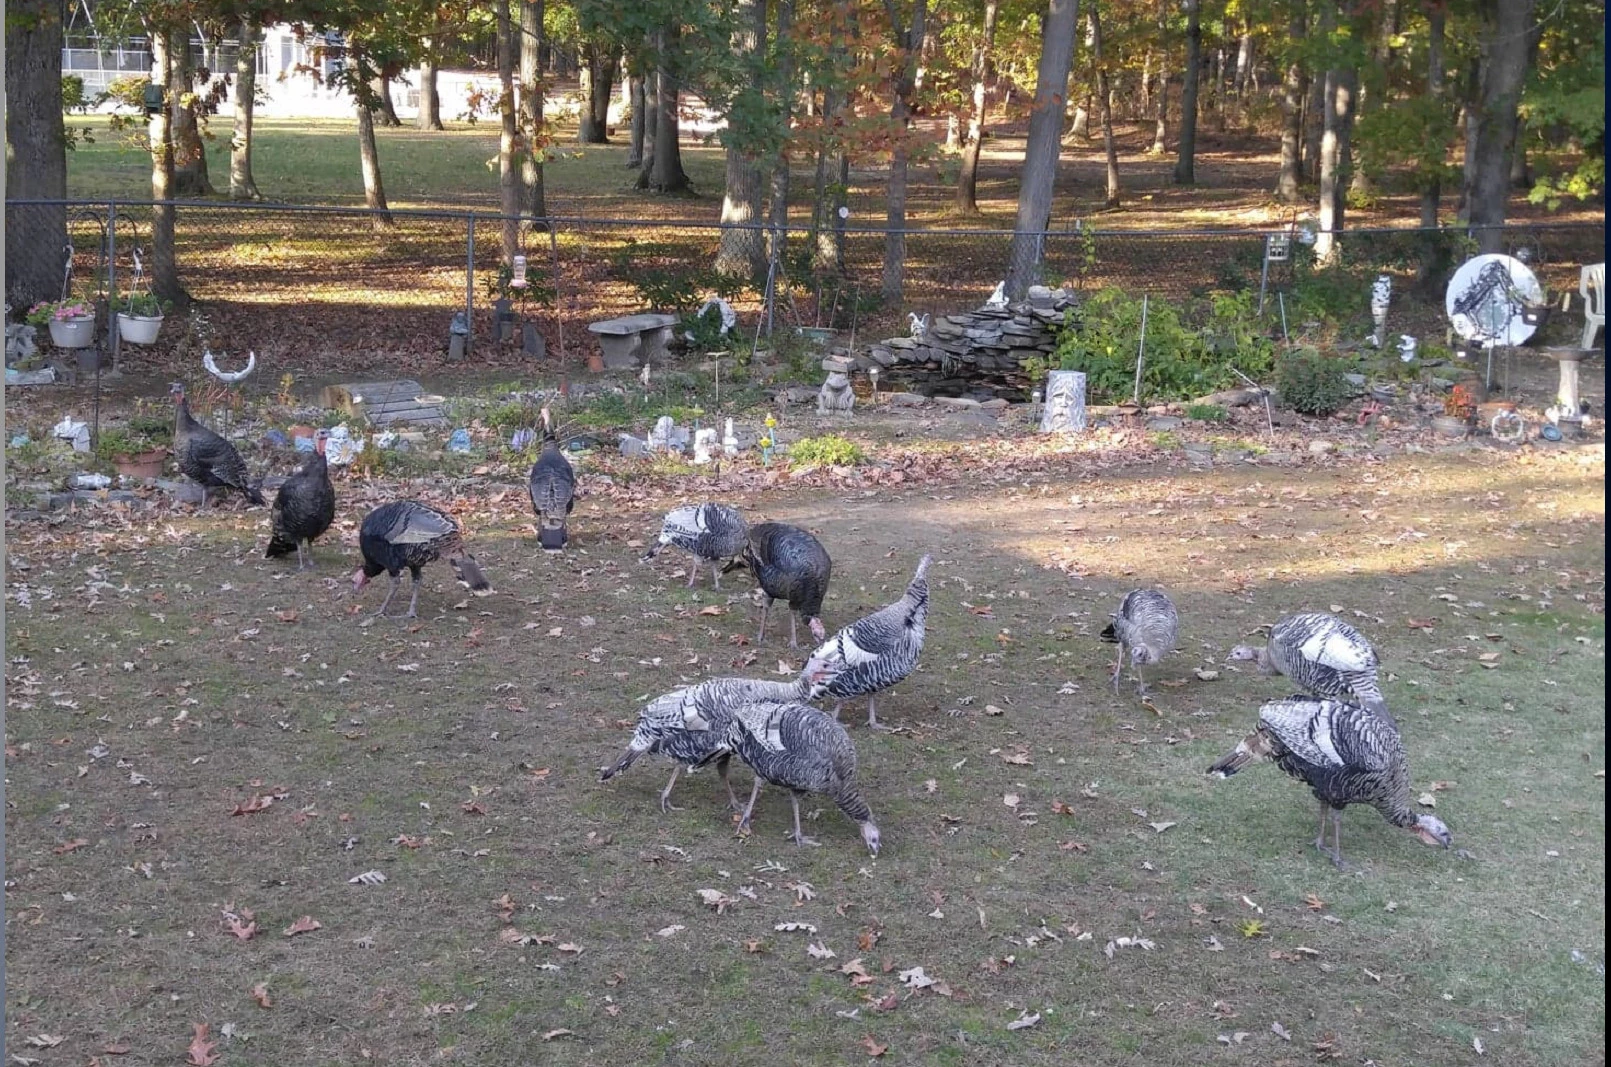 Todd Frazier: I'm being terrorized by Toms River turkeys